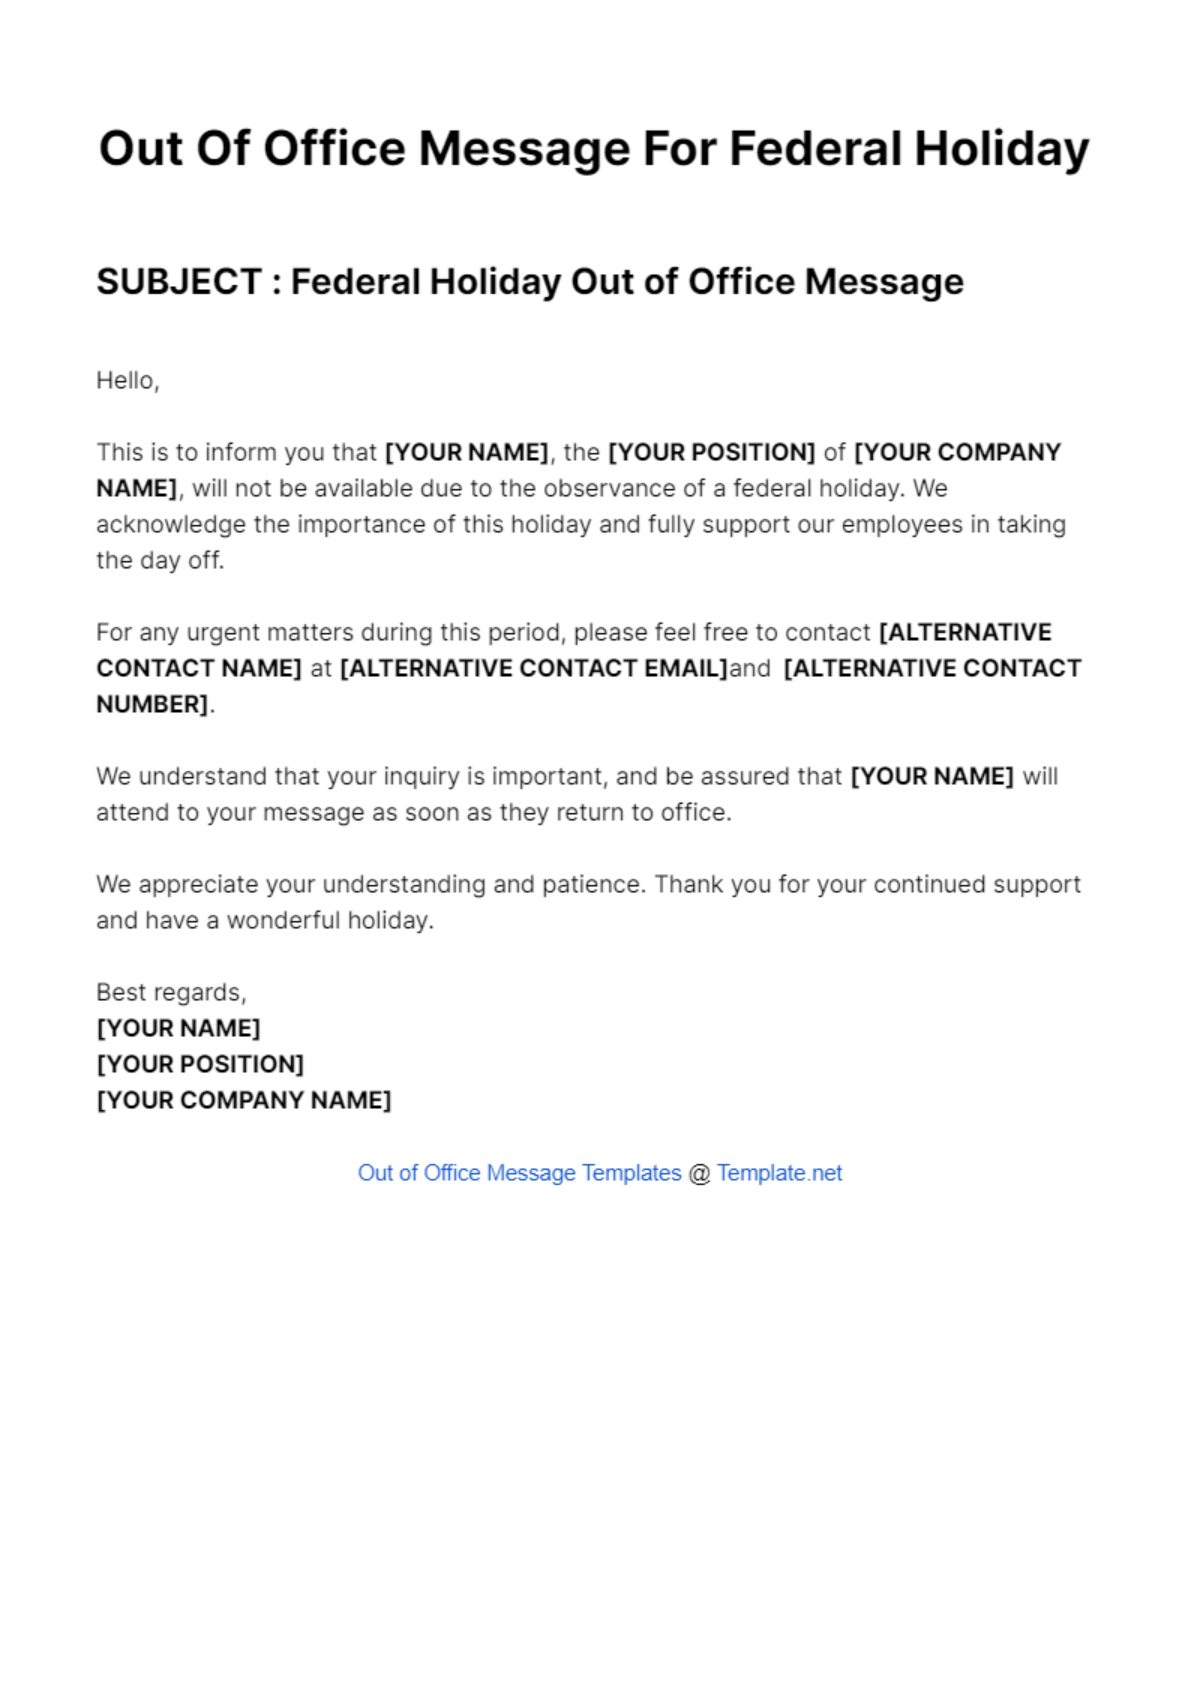 Out Of Office Message For Federal Holiday Template